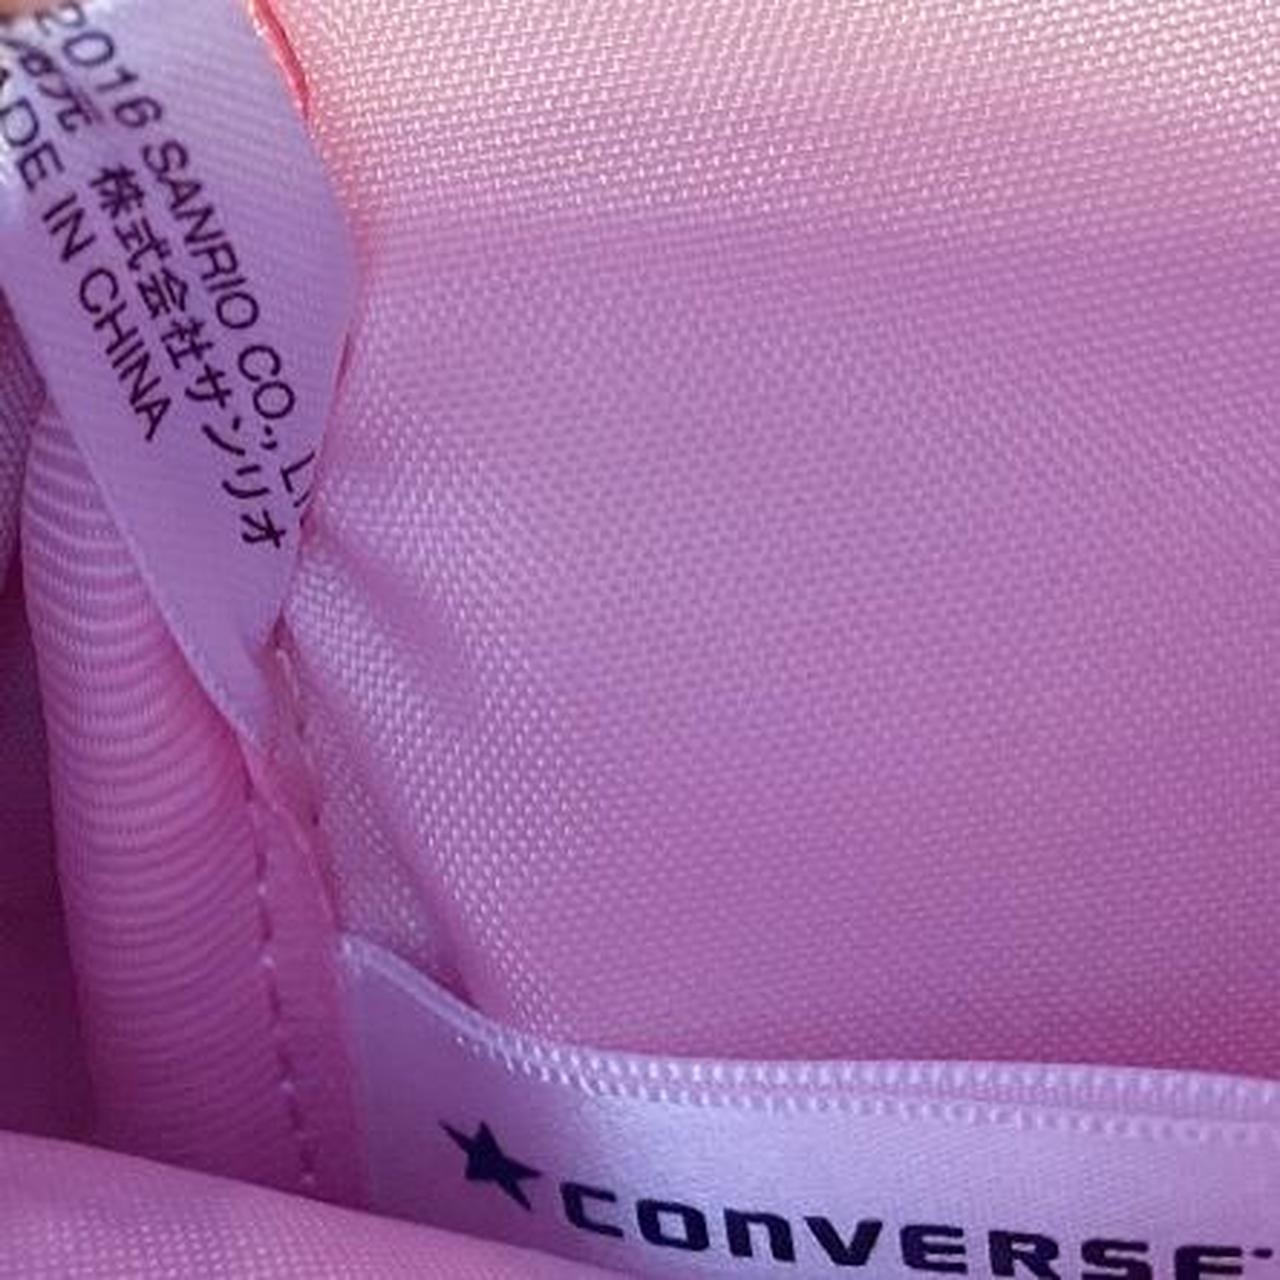 2016 Sanrio My Melody x Converse Backpack